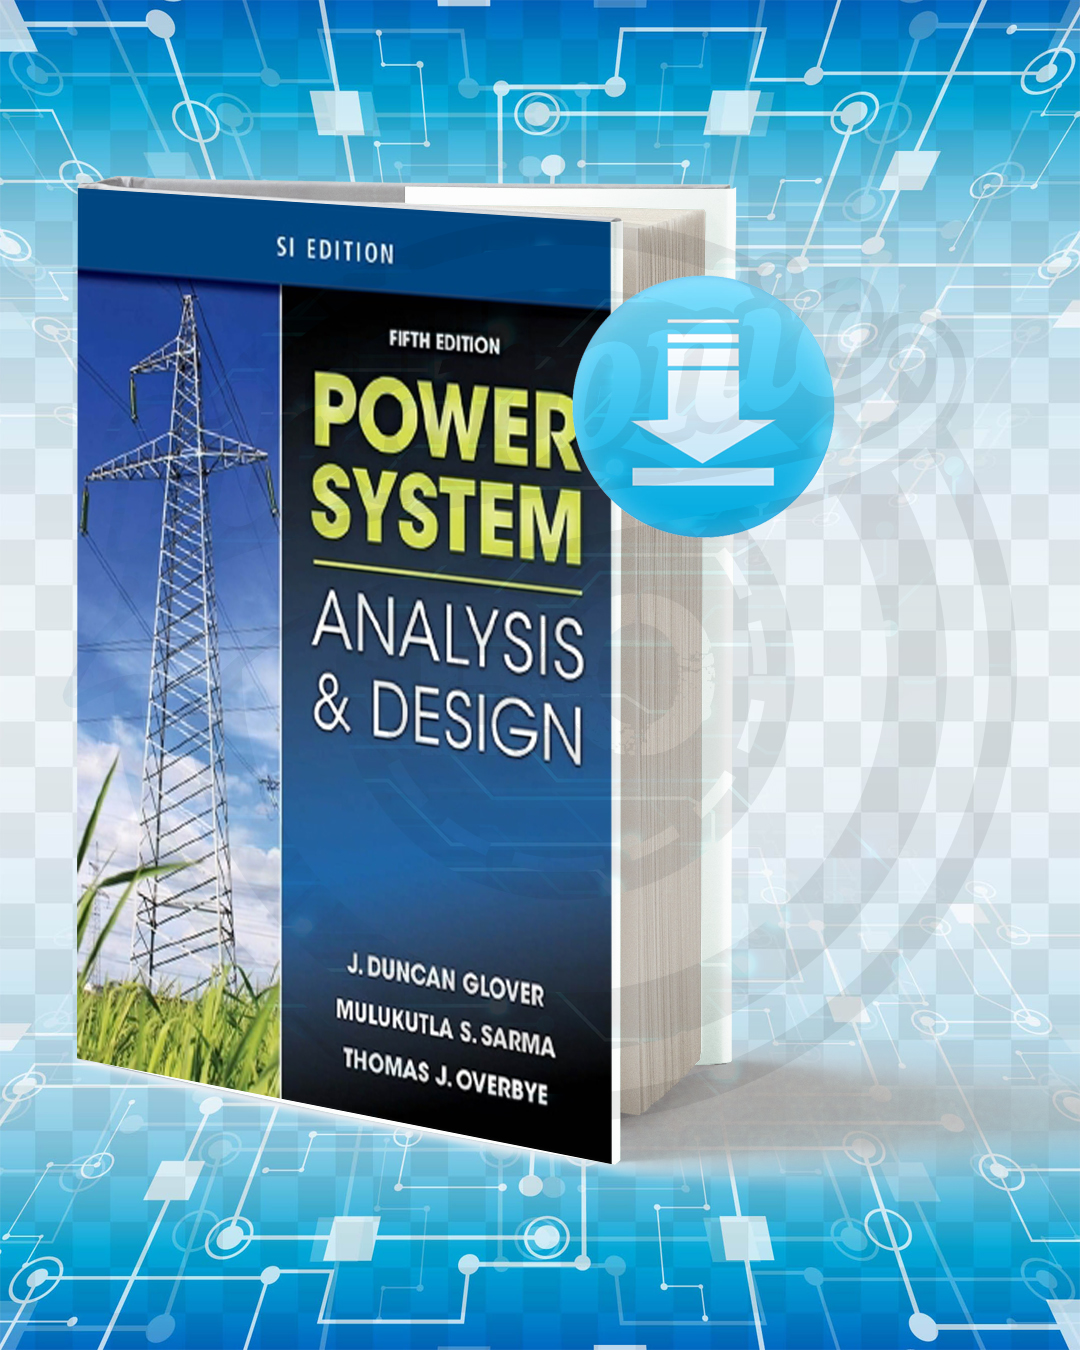 power system thesis topics